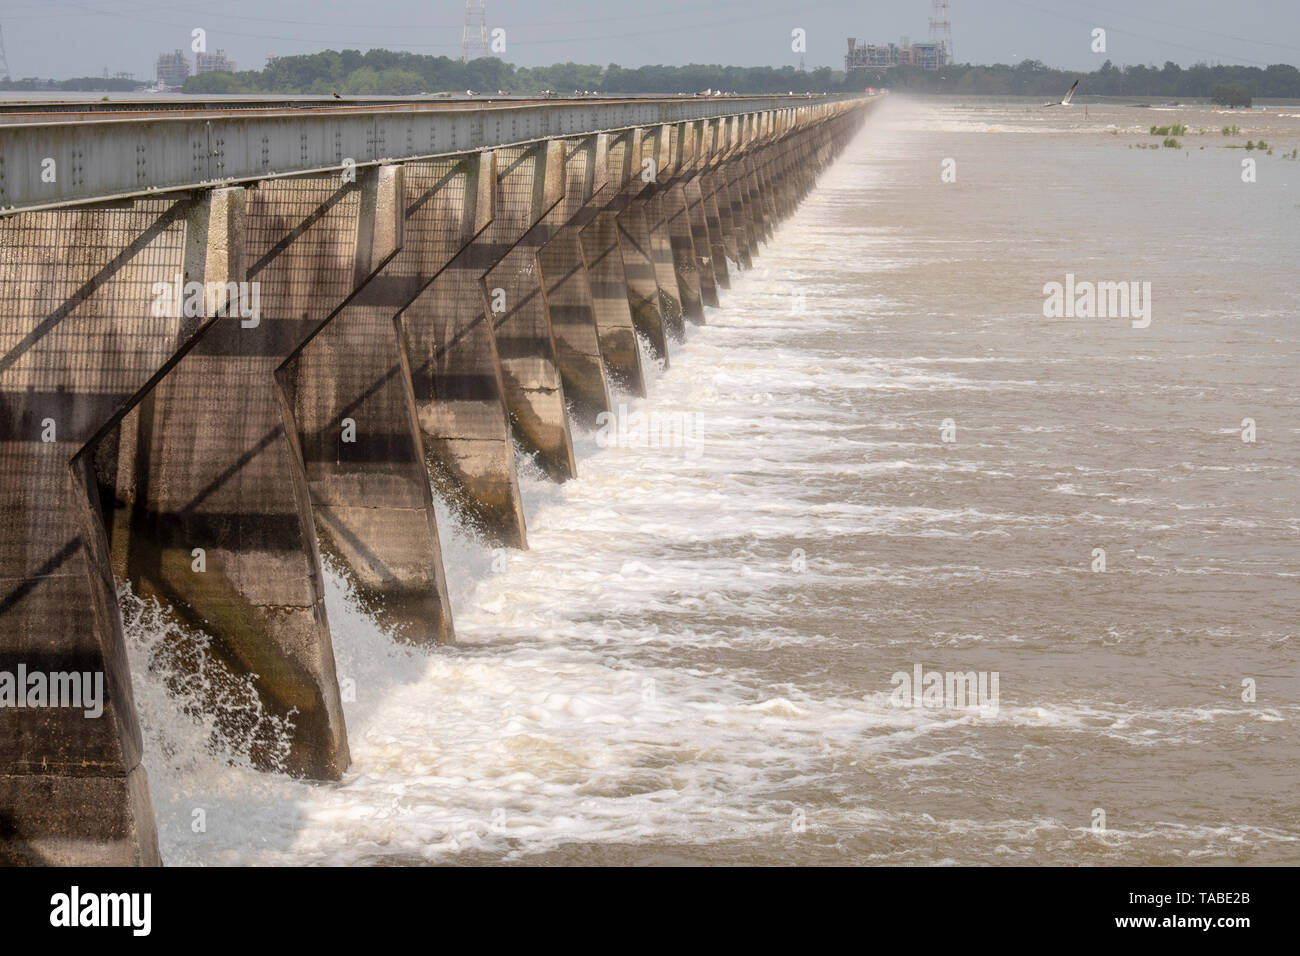 Norco, Louisiana - The U.S. Army Corps of Engineers opened the Bonnet CarrÃ© Spillway to protect New Orleans from Mississippi River flooding. The spil Stock Photo